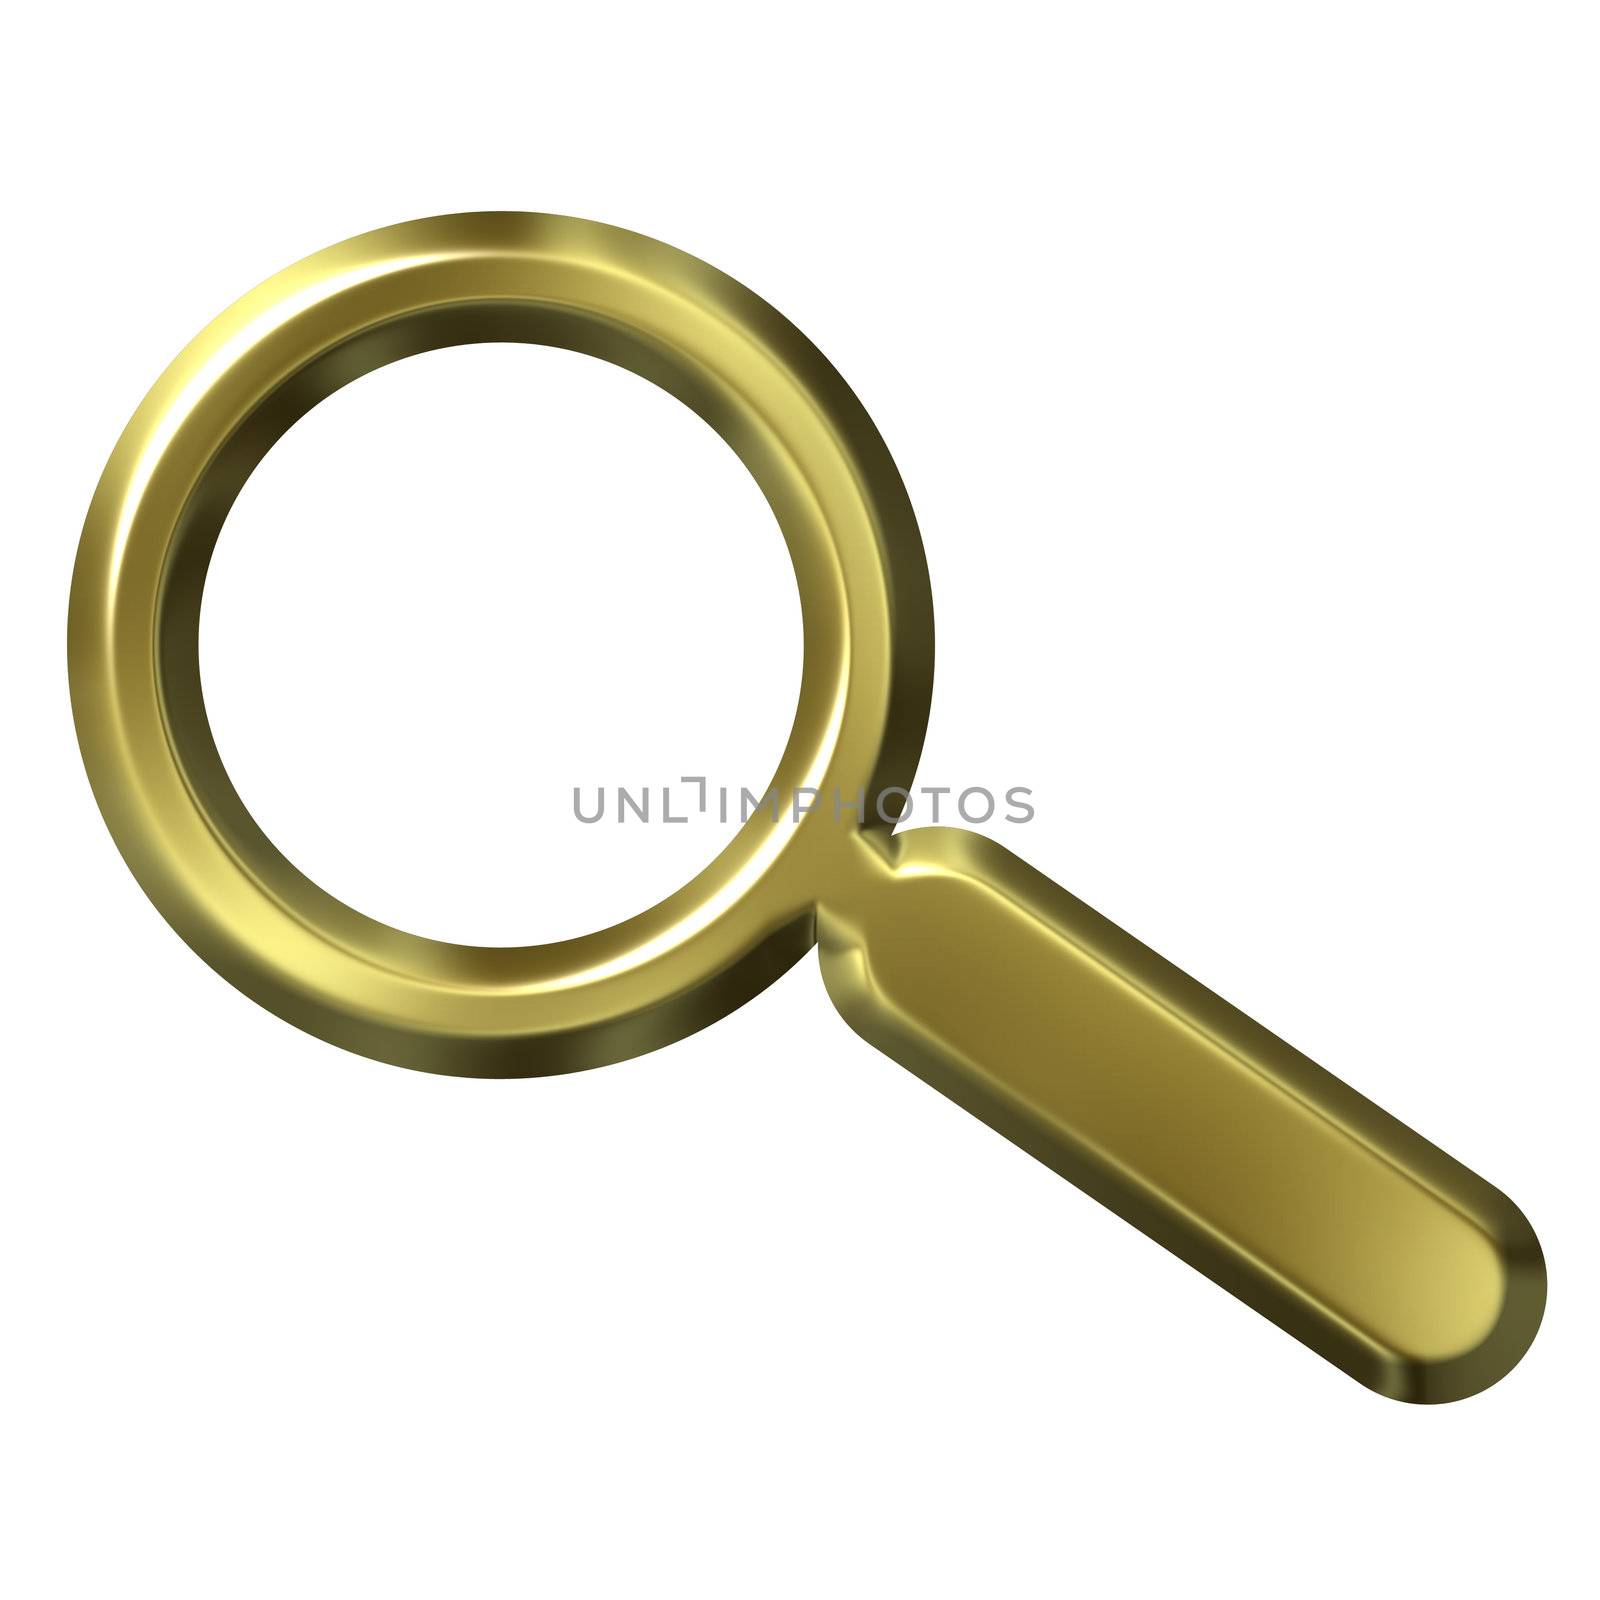 Golden Magnifying Glass by Georgios